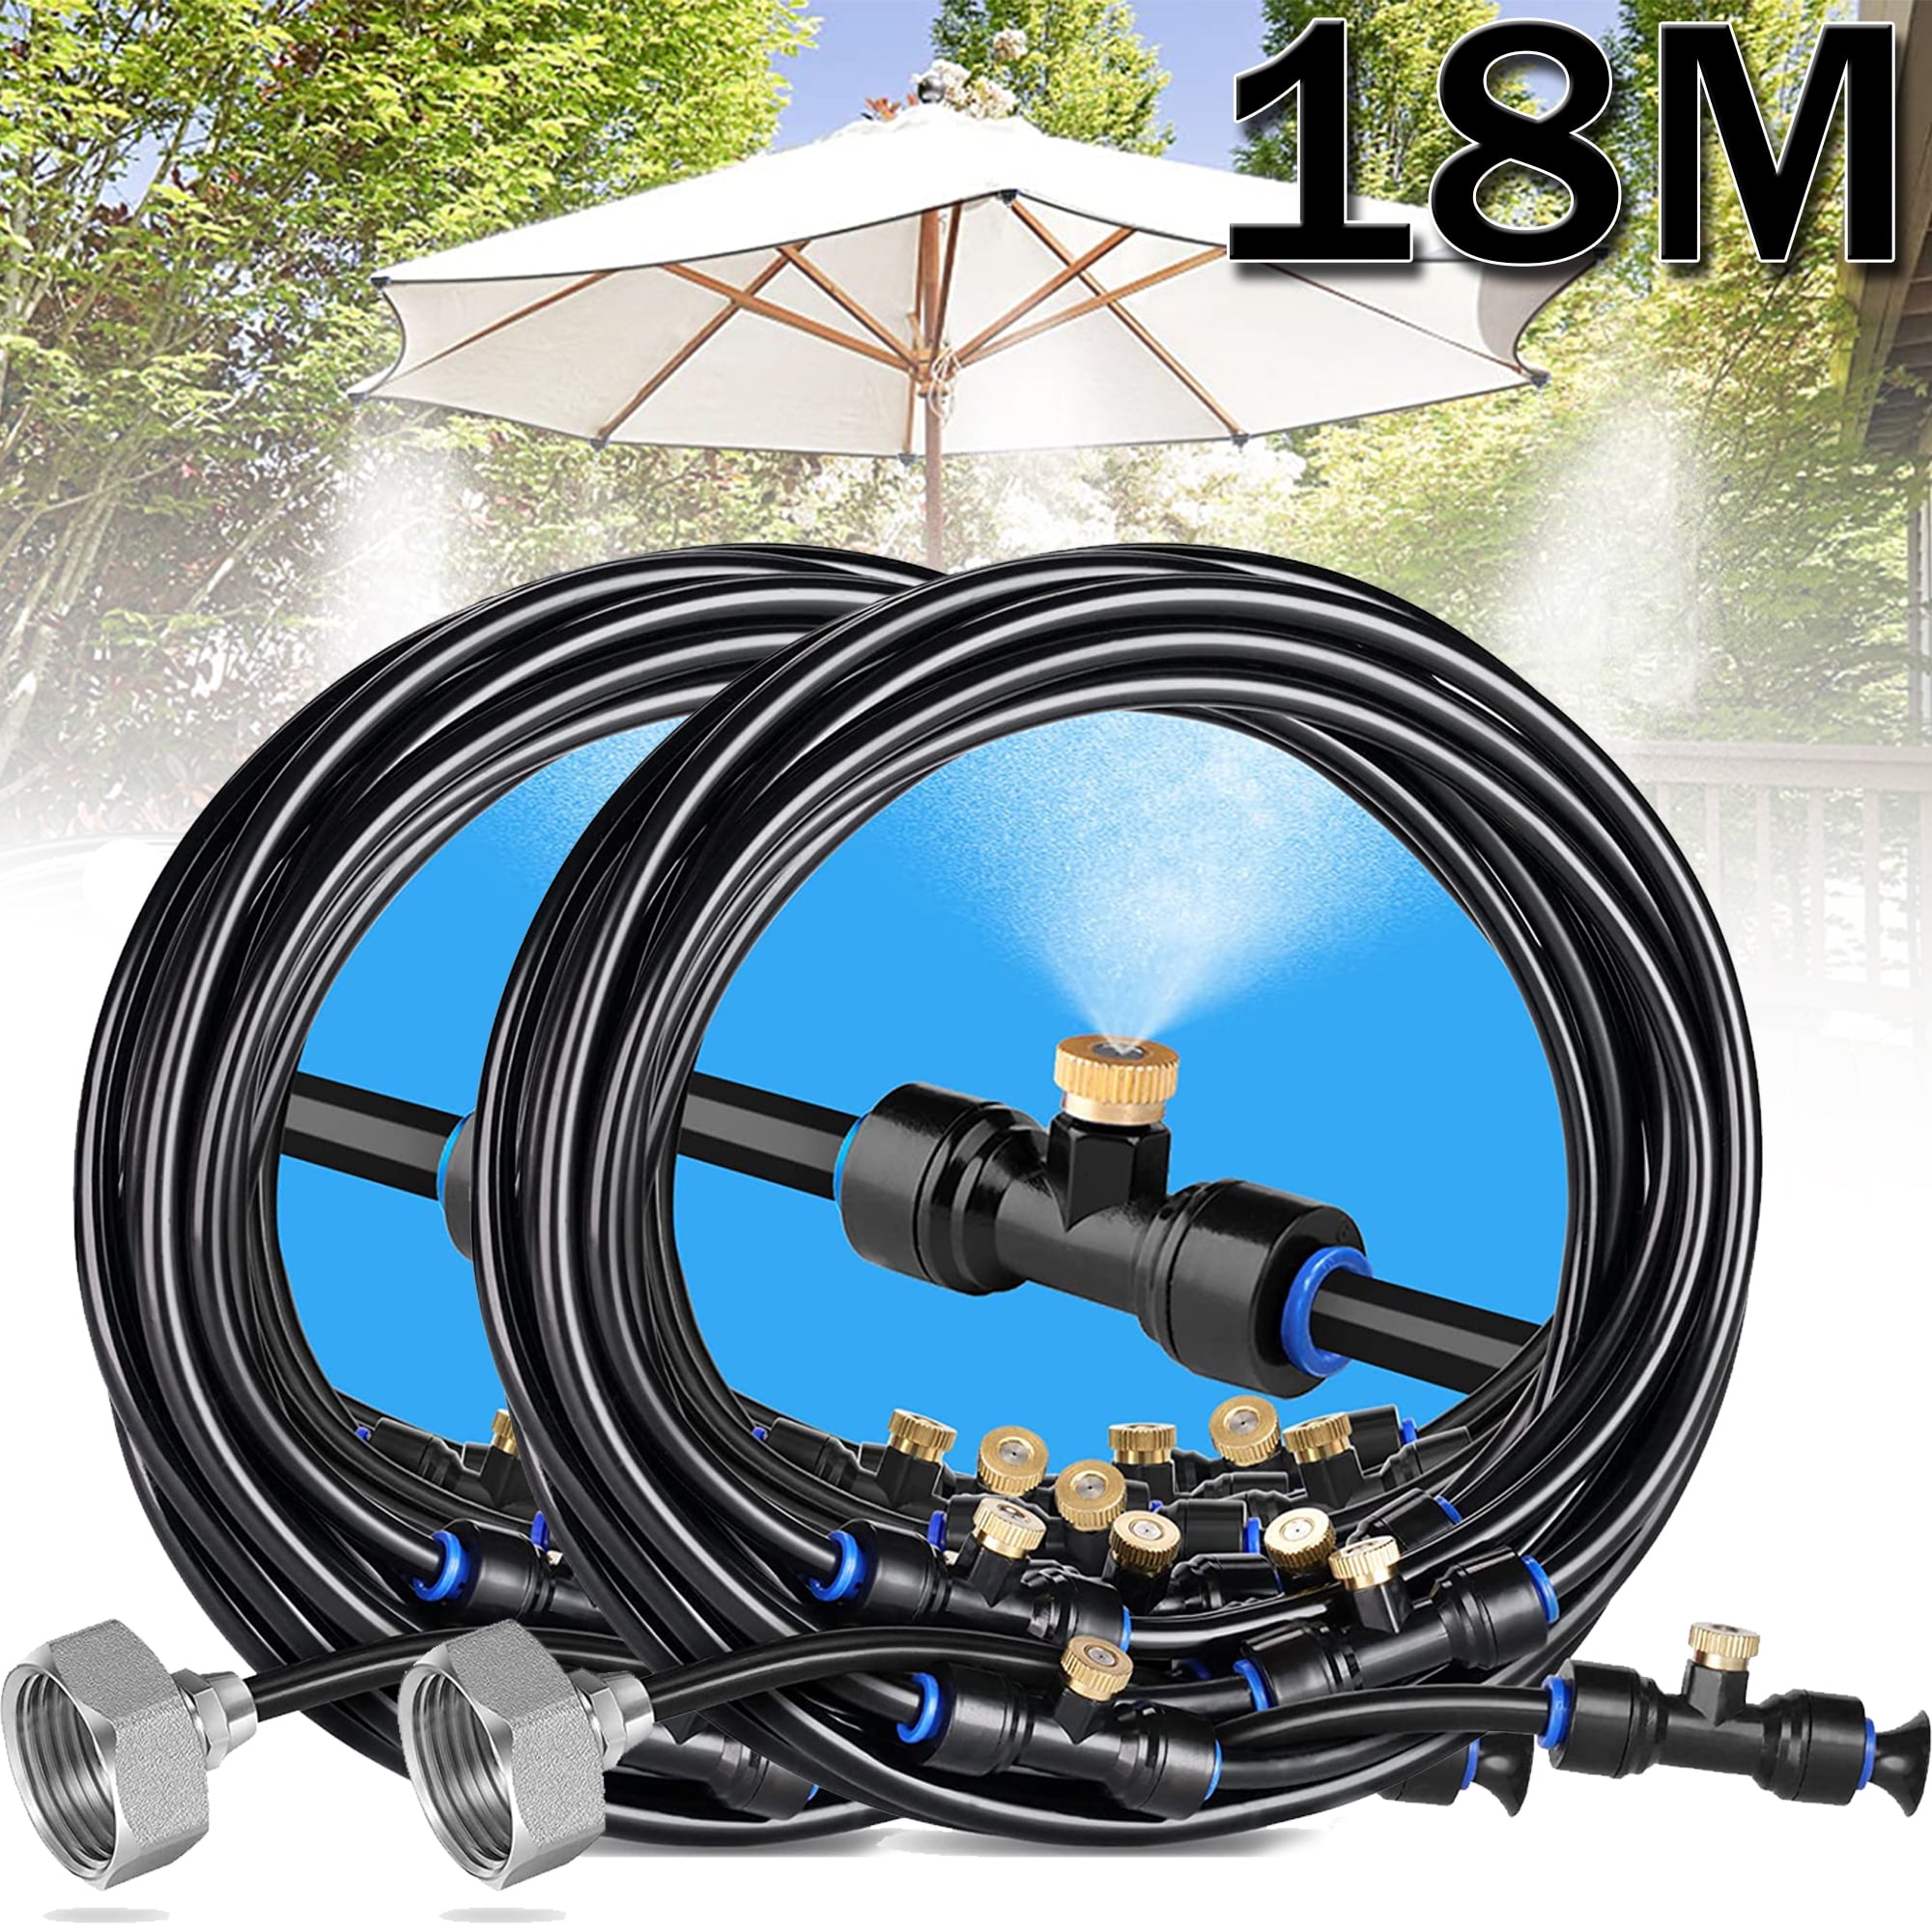 Elbourn Misting Cooling System, Mist System for Patio with 59FT